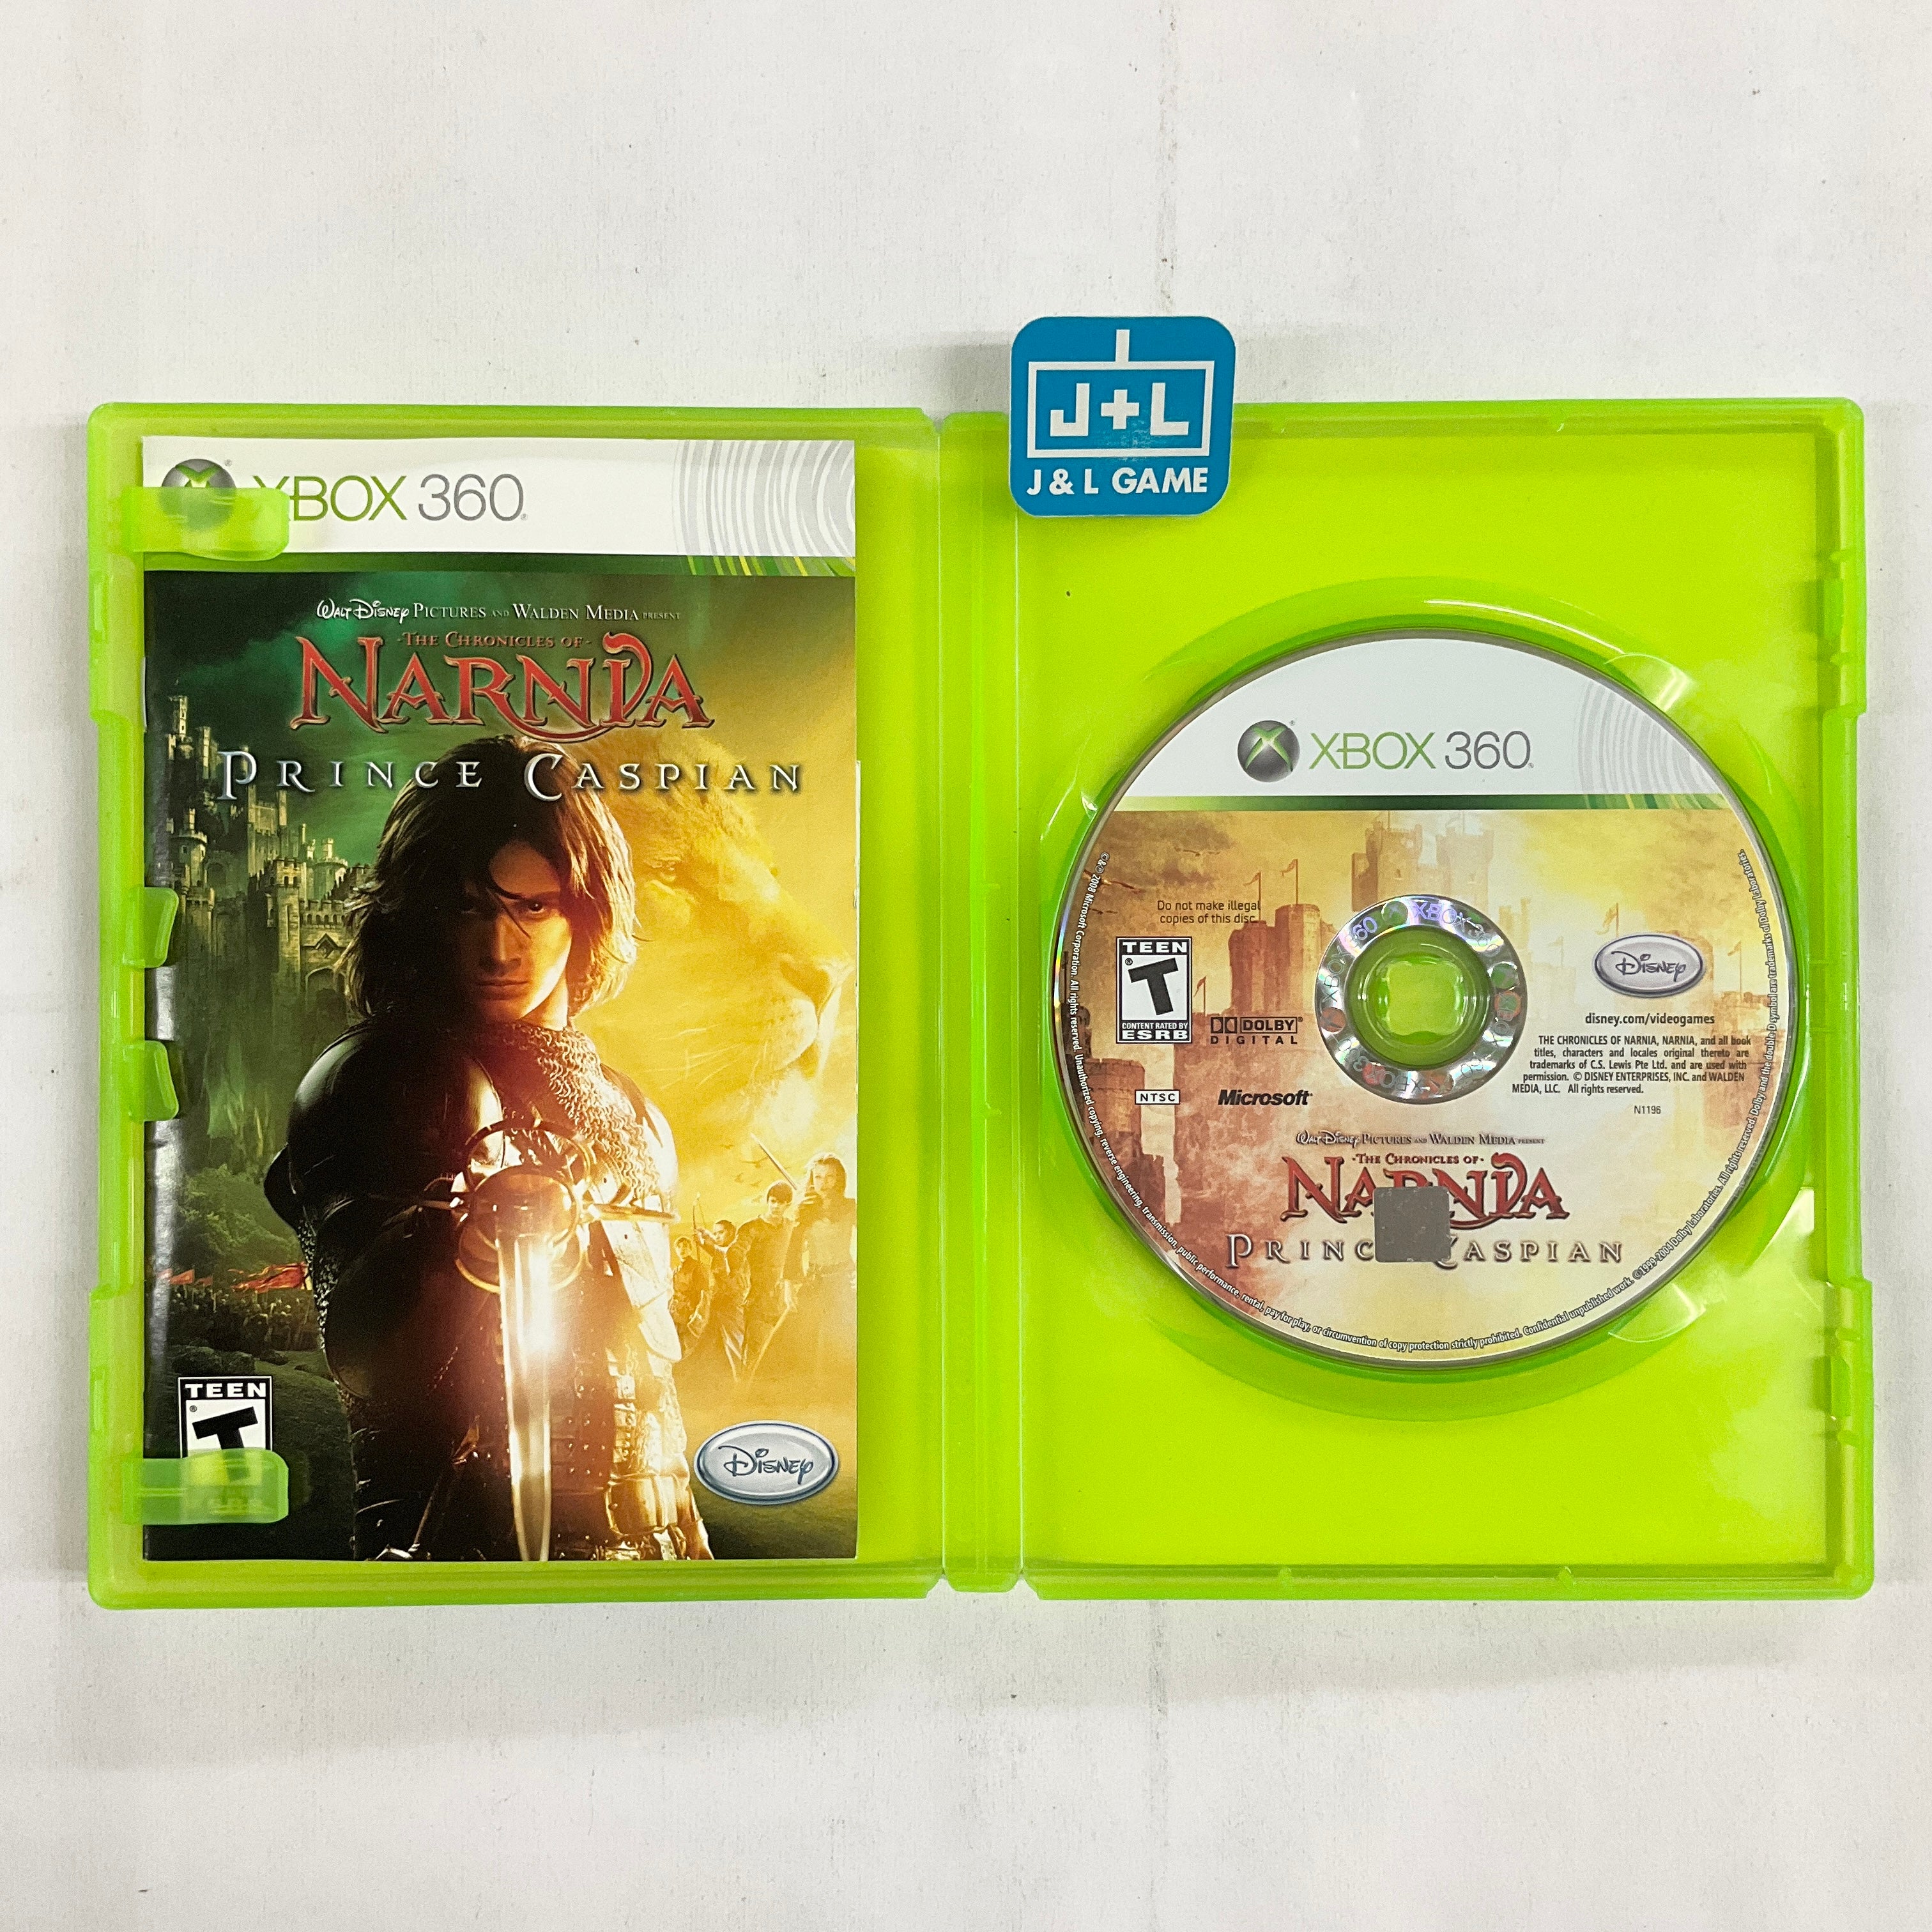 The Chronicles of Narnia: Prince Caspian - Xbox 360 [Pre-Owned] Video Games Disney Interactive Studios   